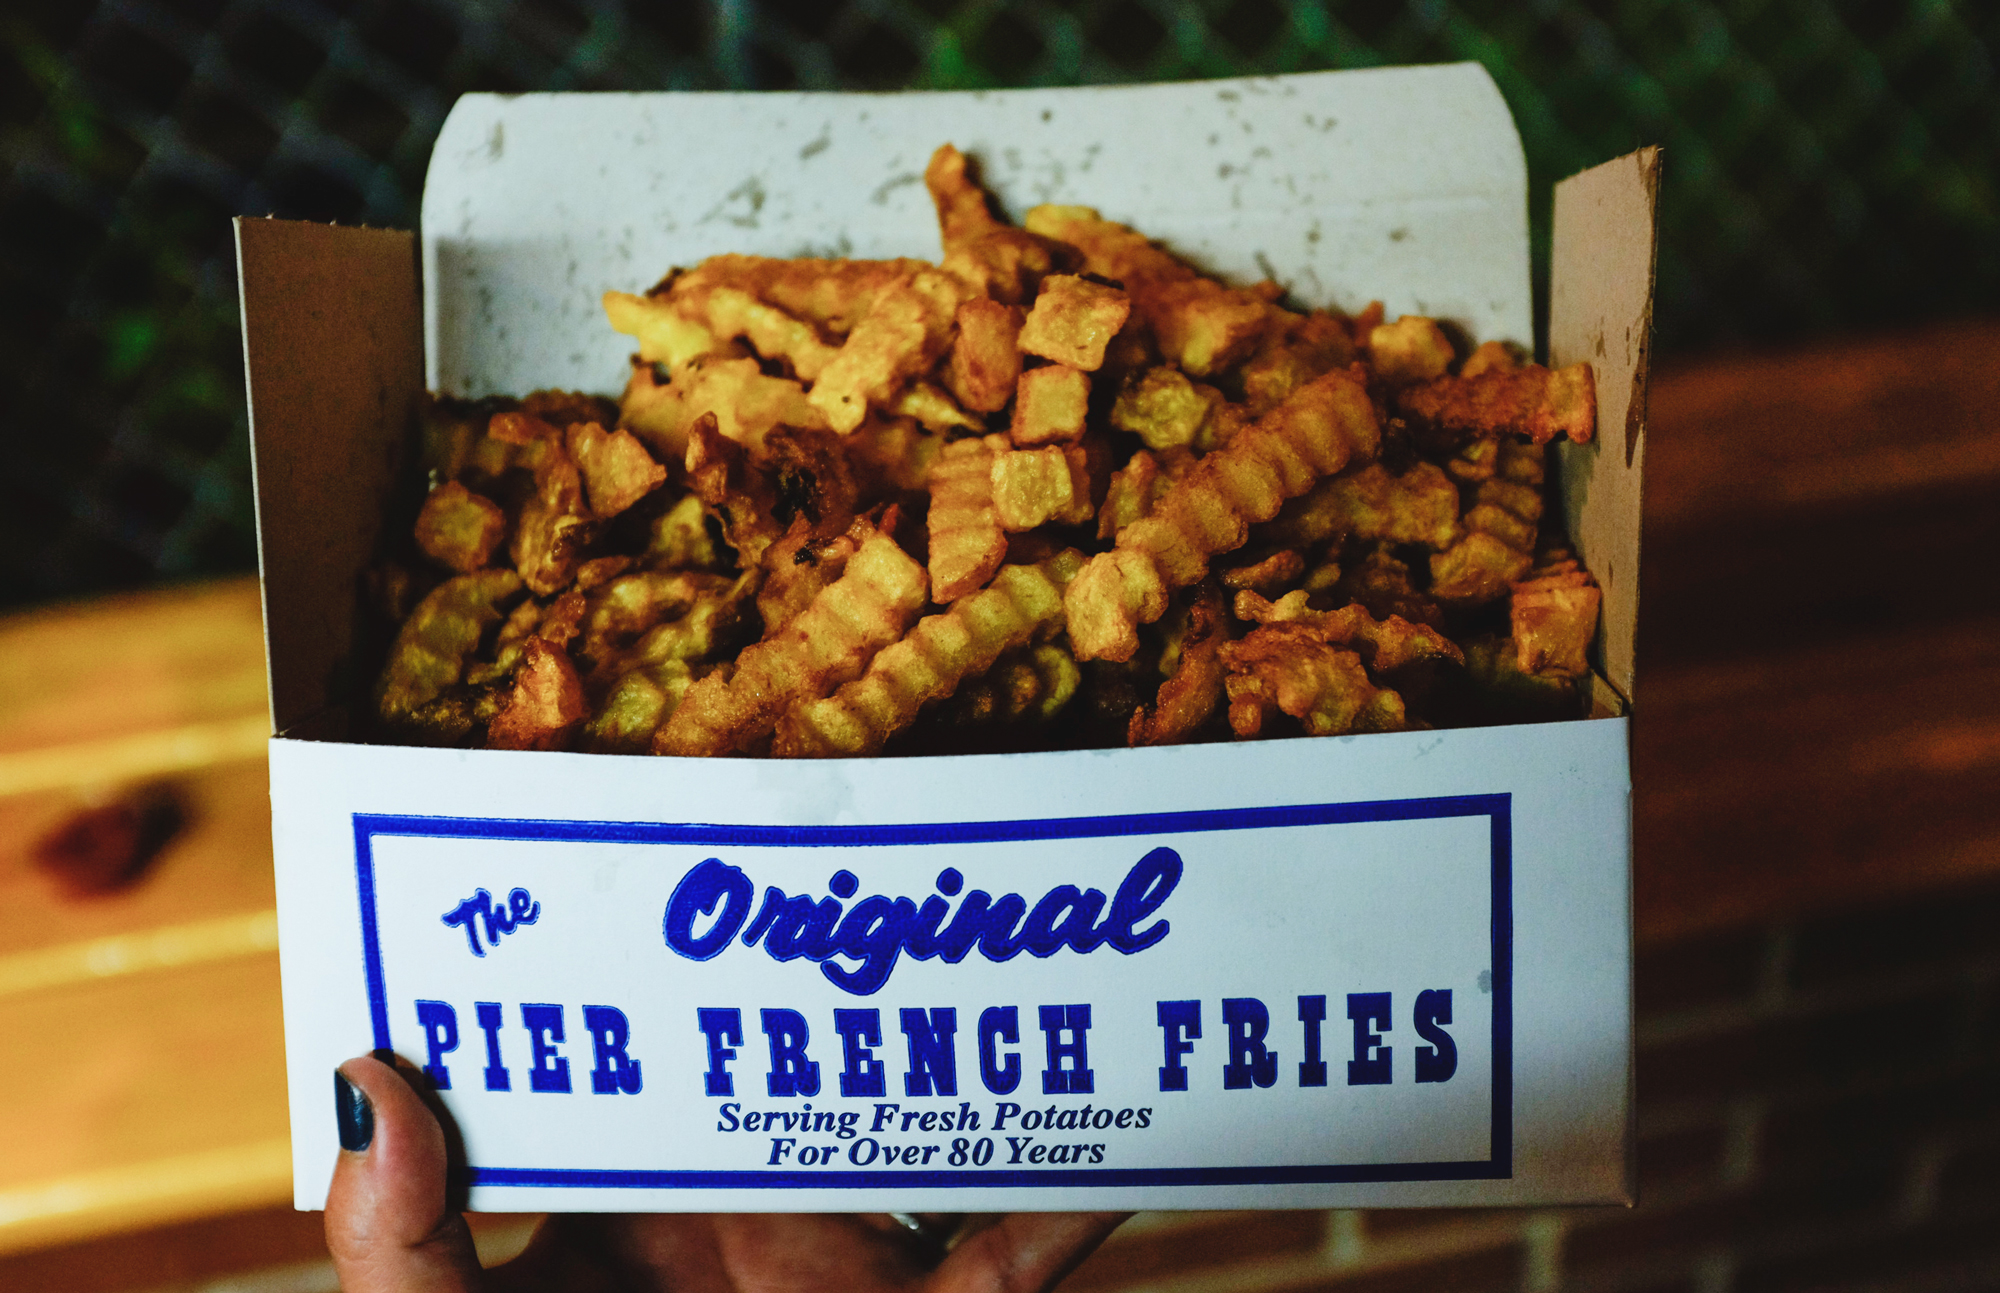 And we shared the biggest box of fries. Worth it.